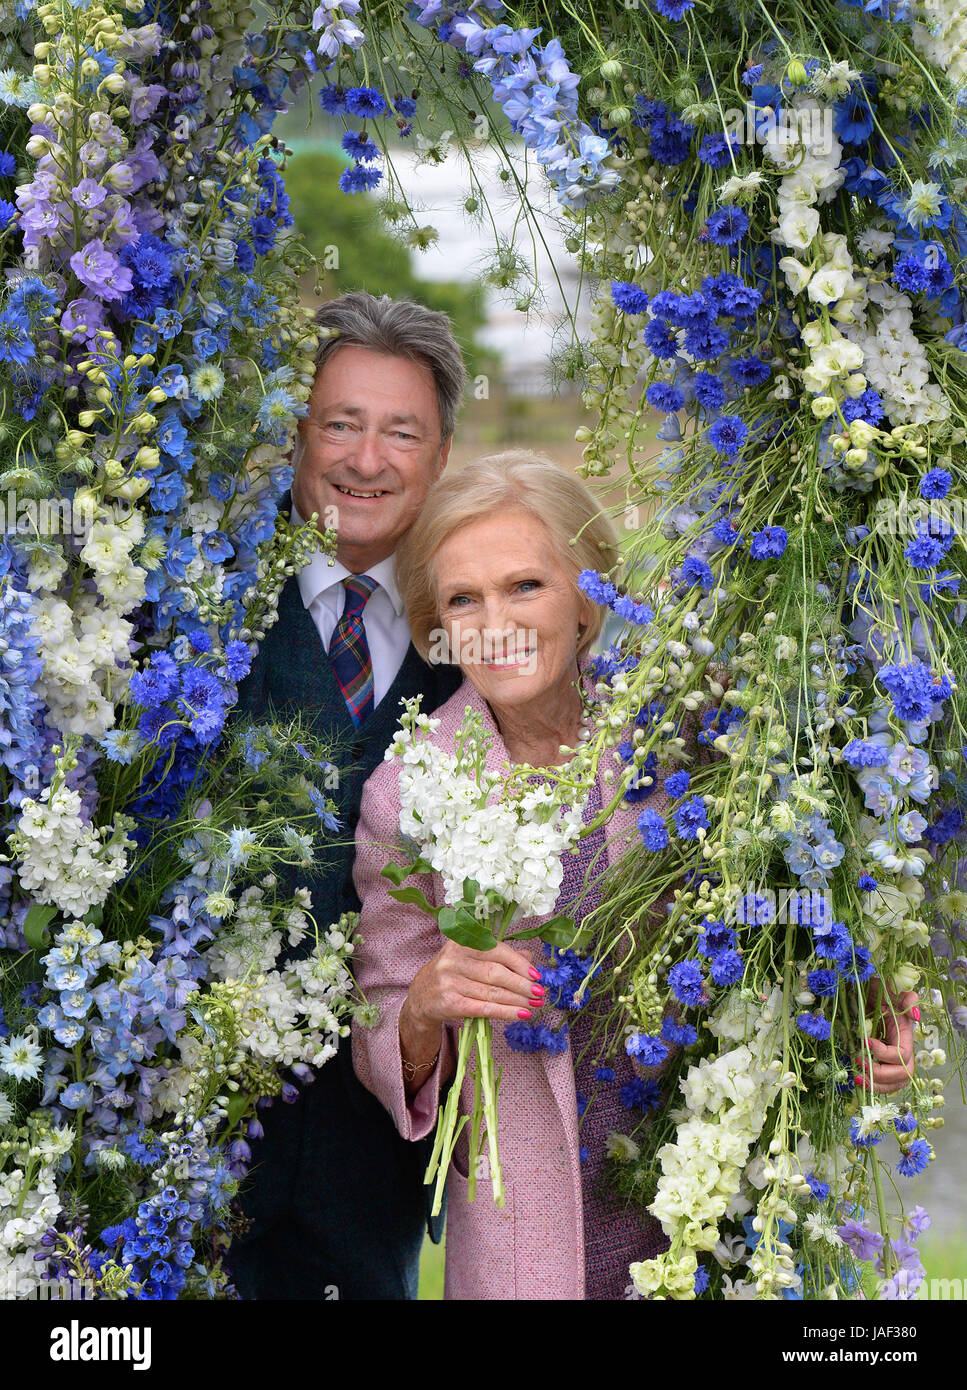 Chatsworth, Derbyshire, UK. 6th June, 2017. 6th June 2017. Chatsworth Royal Horticultural Society Flower Show. Picture shows TV presenters Alan Titchmarsh and Mary Berry open the Chatsworth Royal Horticultural Societies Flower Show at Chatsworth House in Derbyshire. Credit: Howard Walker/Alamy Live News Stock Photo